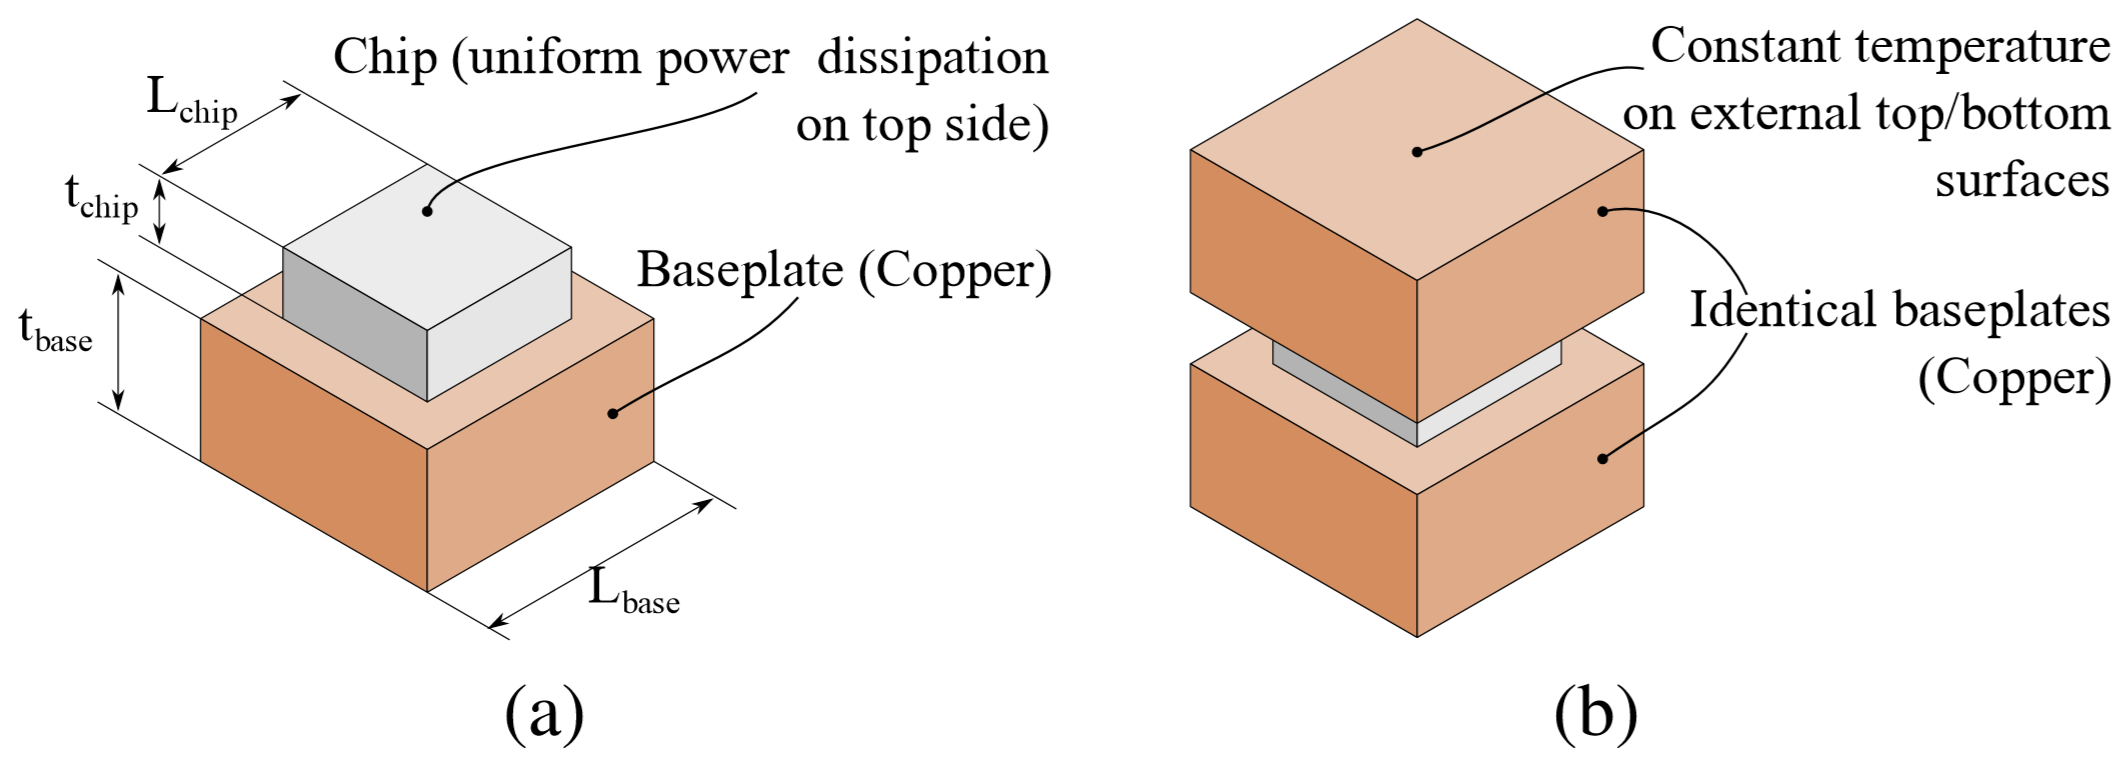 Cooling configurations